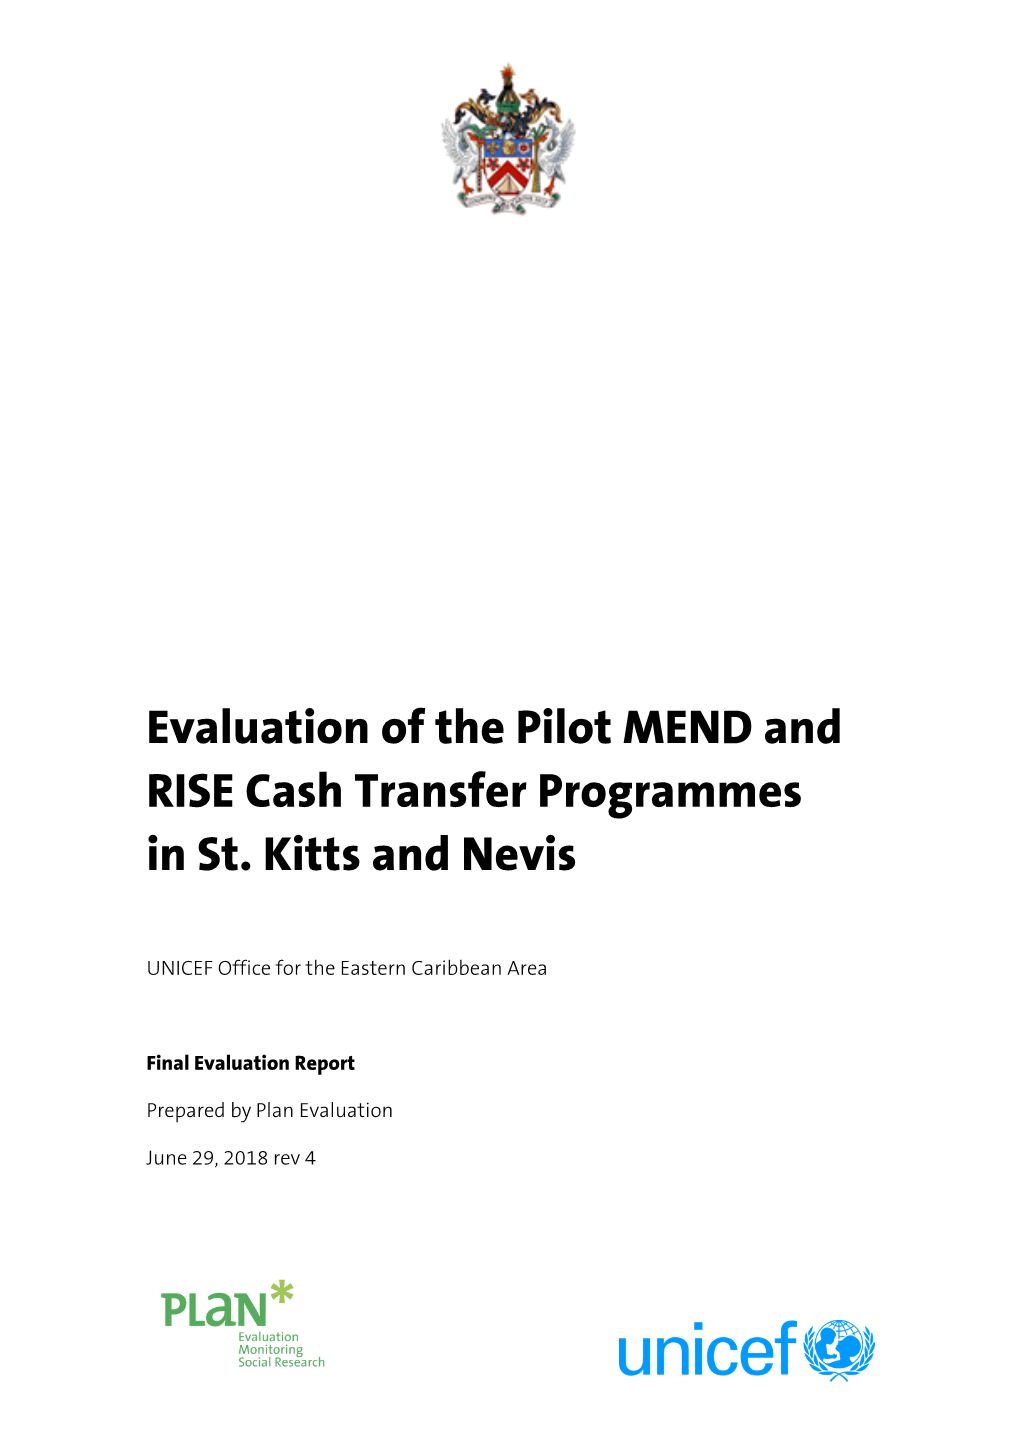 Evaluation of the Pilot MEND and RISE Cash Transfer Programmes in St